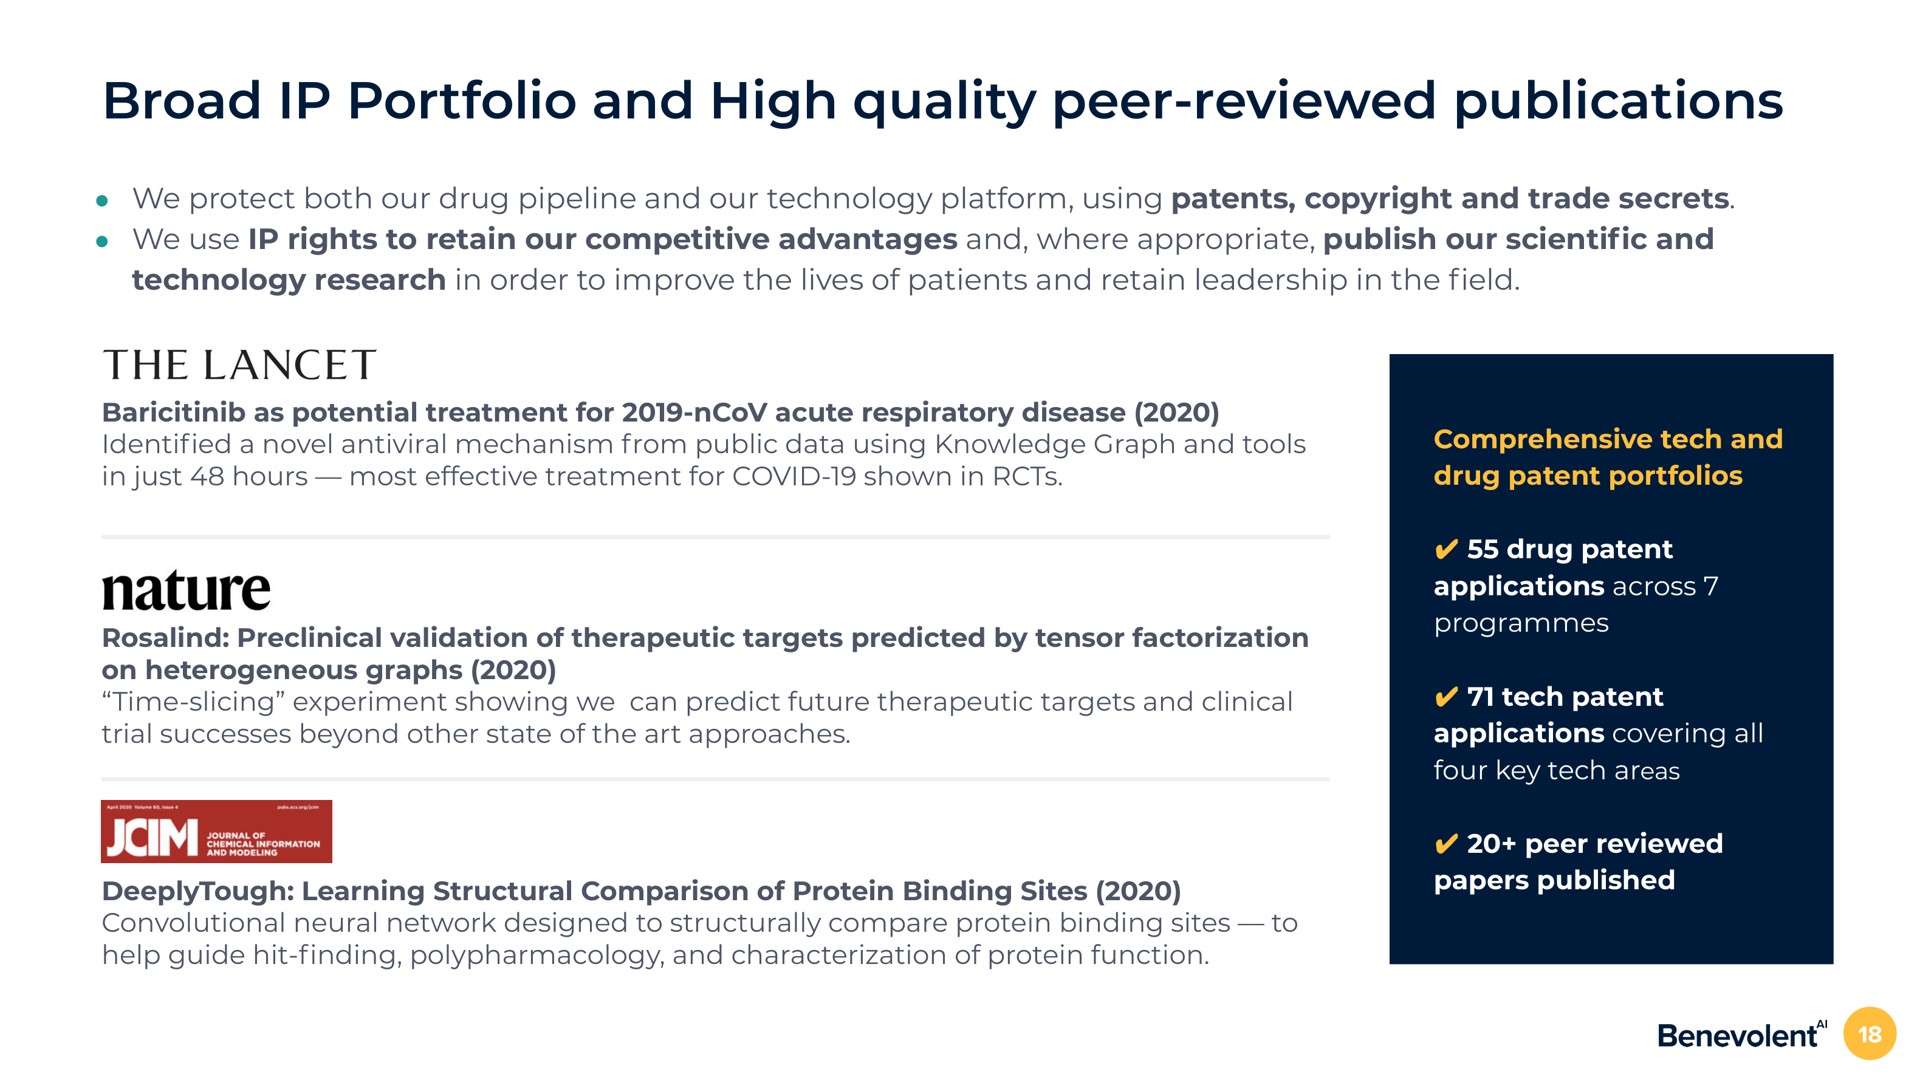 broad portfolio and high quality peer reviewed publications we protect both our drug pipeline and our technology platform using patents copyright and trade secrets we use rights to retain our competitive advantages and where appropriate publish our and technology research in order to improve the lives of patients and retain leadership in the eld as potential treatment for acute respiratory disease a novel antiviral mechanism from public data using knowledge graph and tools in just hours most effective treatment for covid shown in comprehensive tech and drug patent portfolios preclinical validation of therapeutic targets predicted by tensor factorization on heterogeneous graphs time slicing experiment showing we can predict future therapeutic targets and clinical trial successes beyond other state of the art approaches learning structural comparison of protein binding sites convolutional neural network designed to structurally compare protein binding sites to help guide hit and characterization of protein function drug patent applications across programmes tech patent applications covering all four key tech areas peer reviewed papers published | BenevolentAI